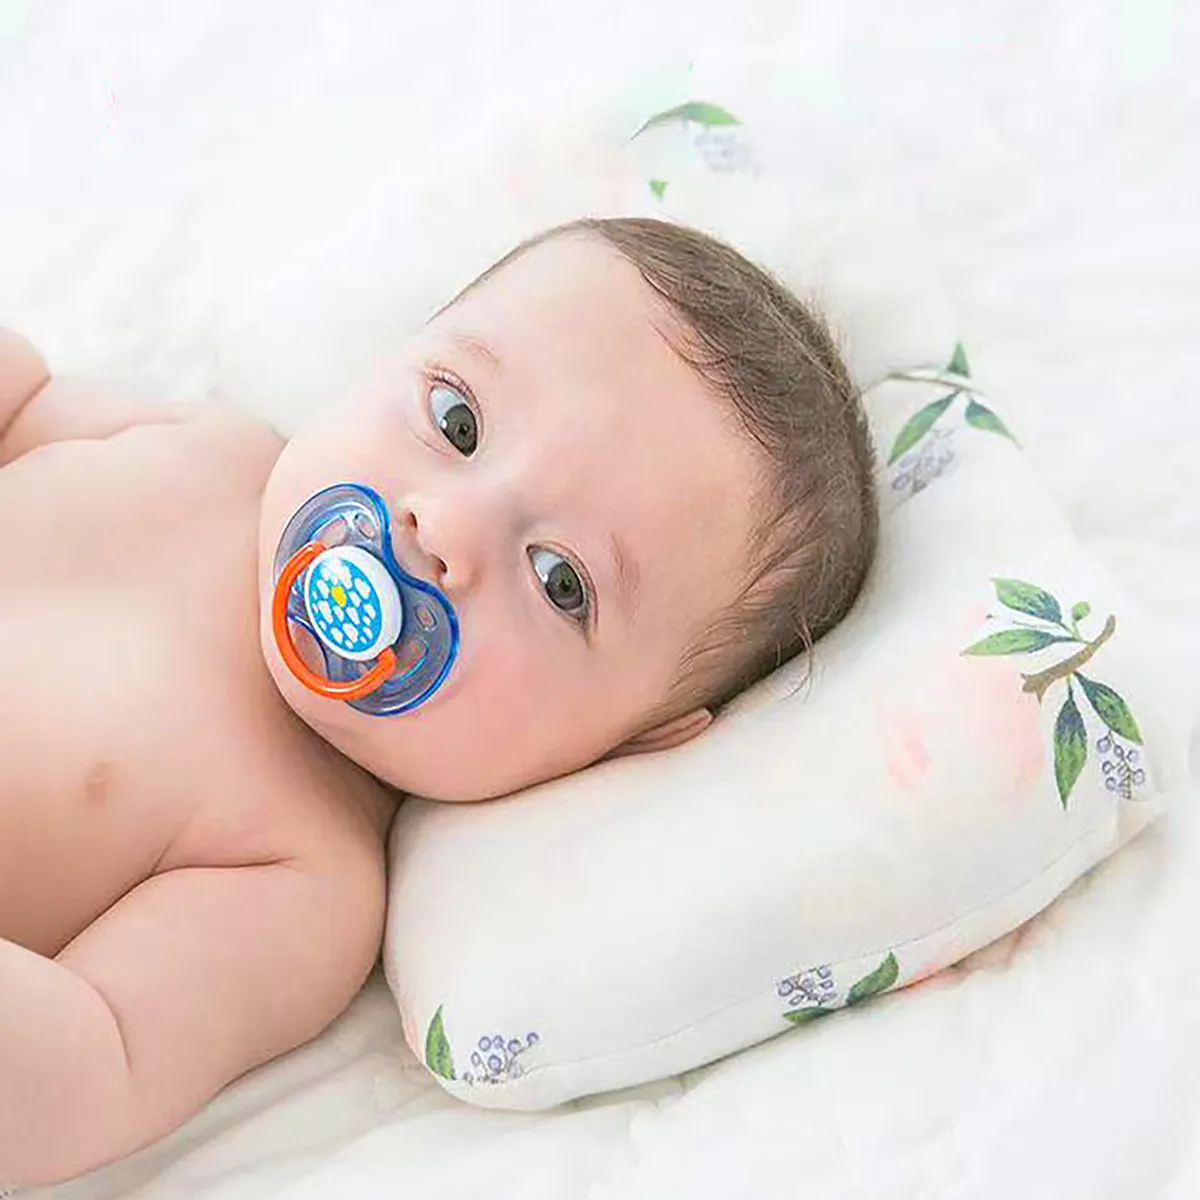 100% Cotton Baby Newborn Sleeping Pillow To Help Prevent And Treat Flat Head Syndrome